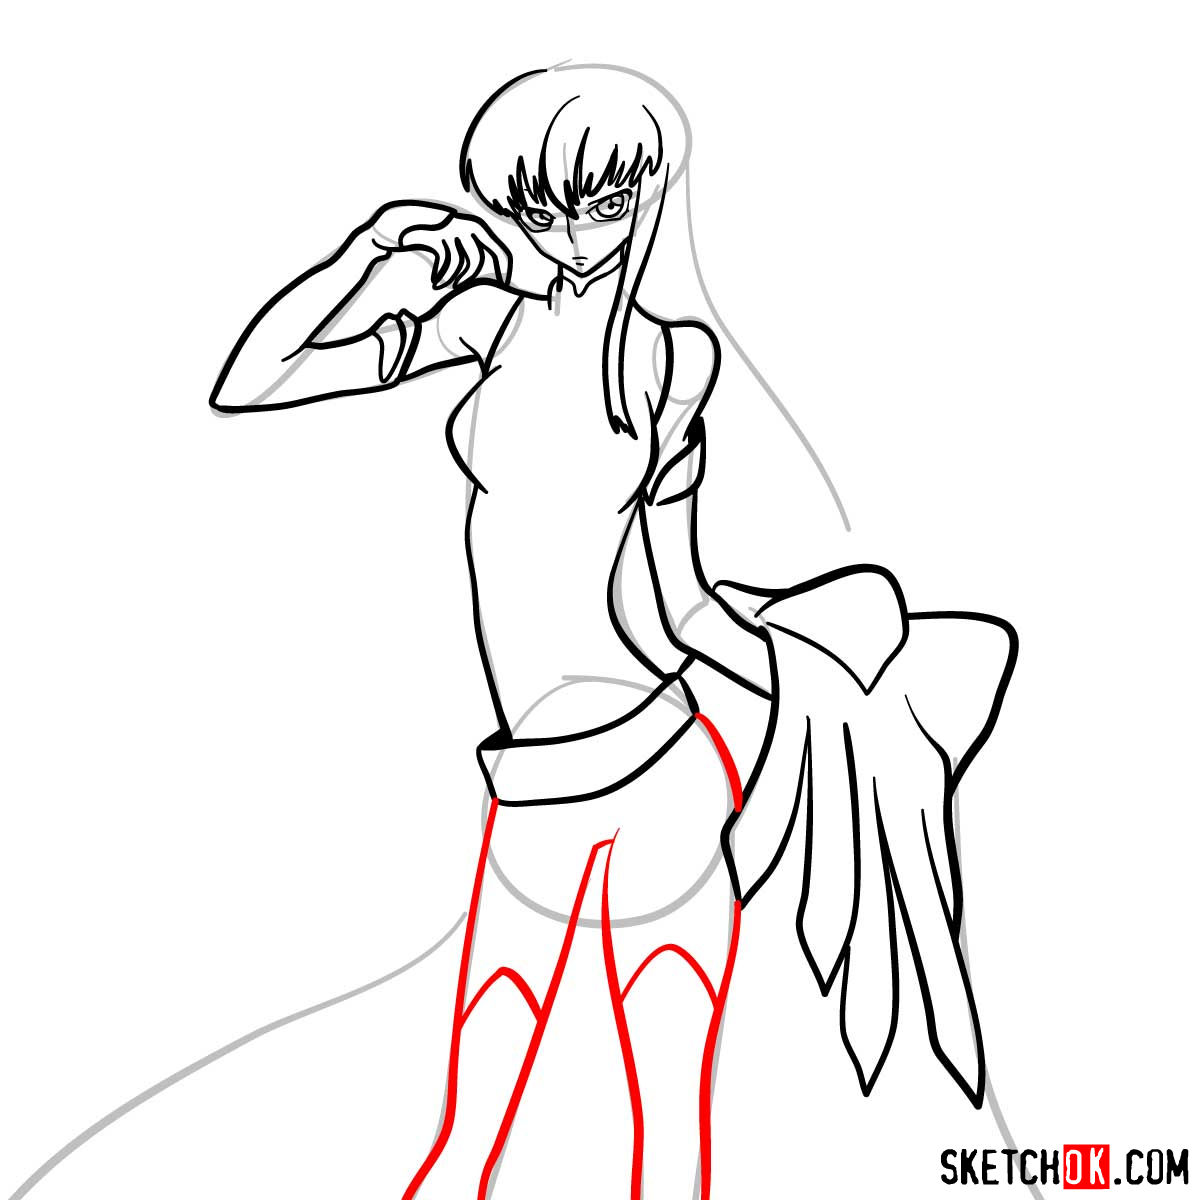 16 steps drawing guide of C.C. from Code Geass anime - step 12